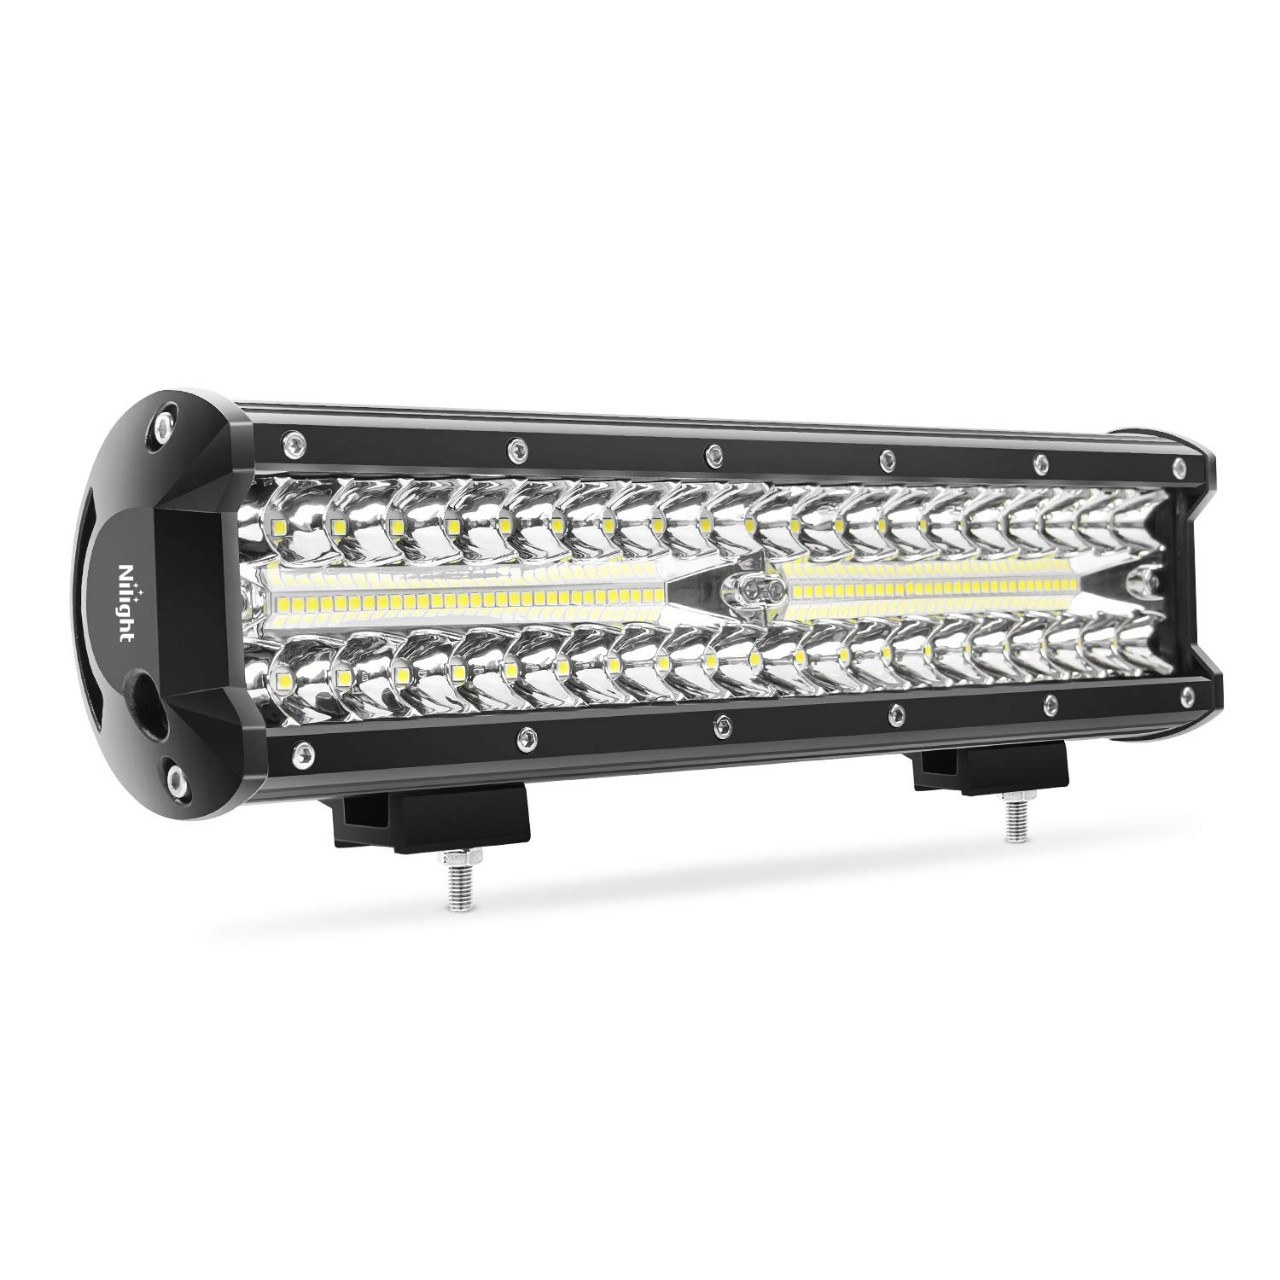 12 Inch 300W Triple Row Flood Spot Combo 30000LM Bar Driving Boat Led Off Road Lights for Trucks